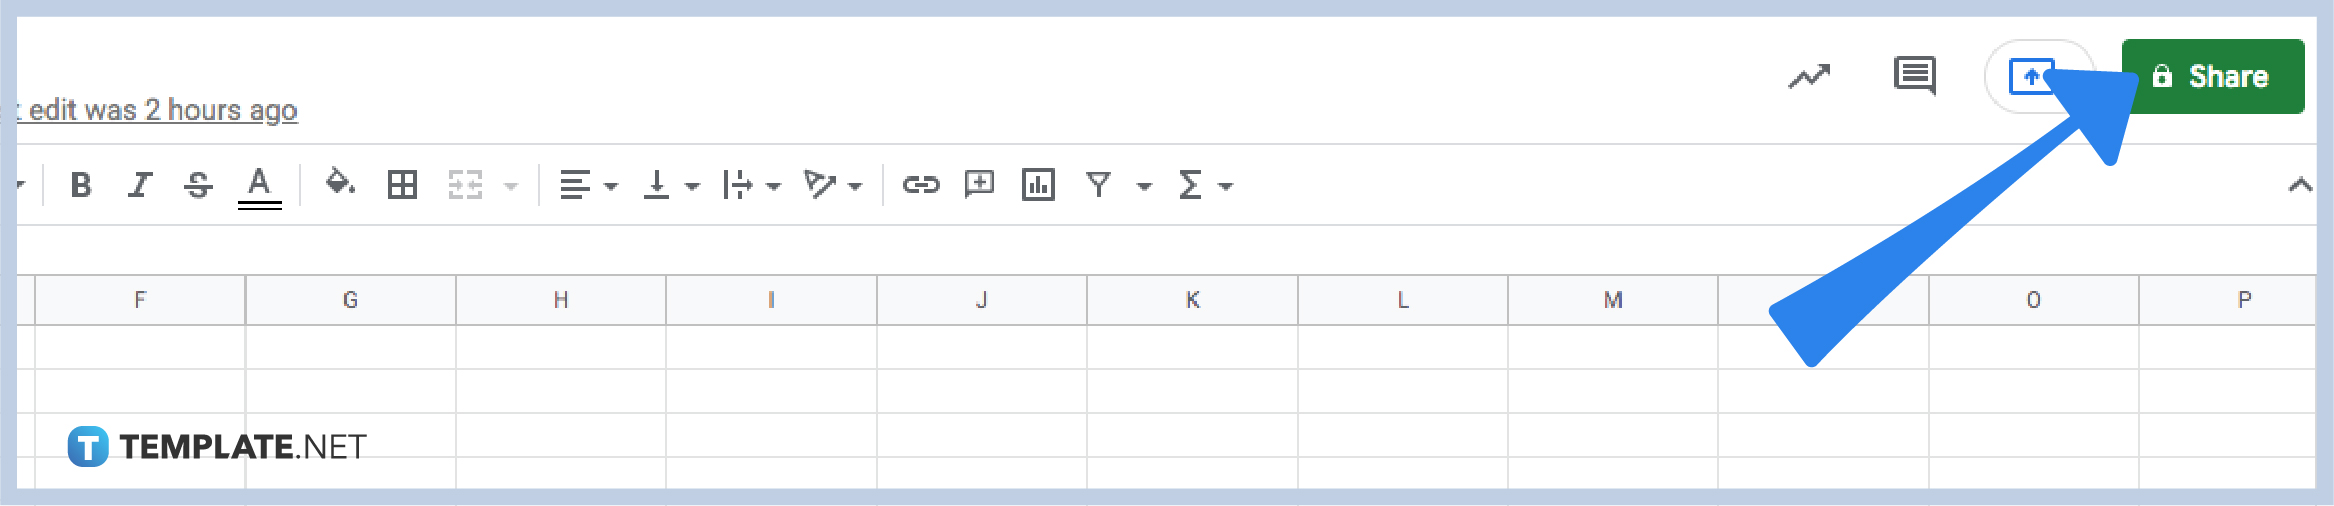 how to make google sheets editable by multiple users step